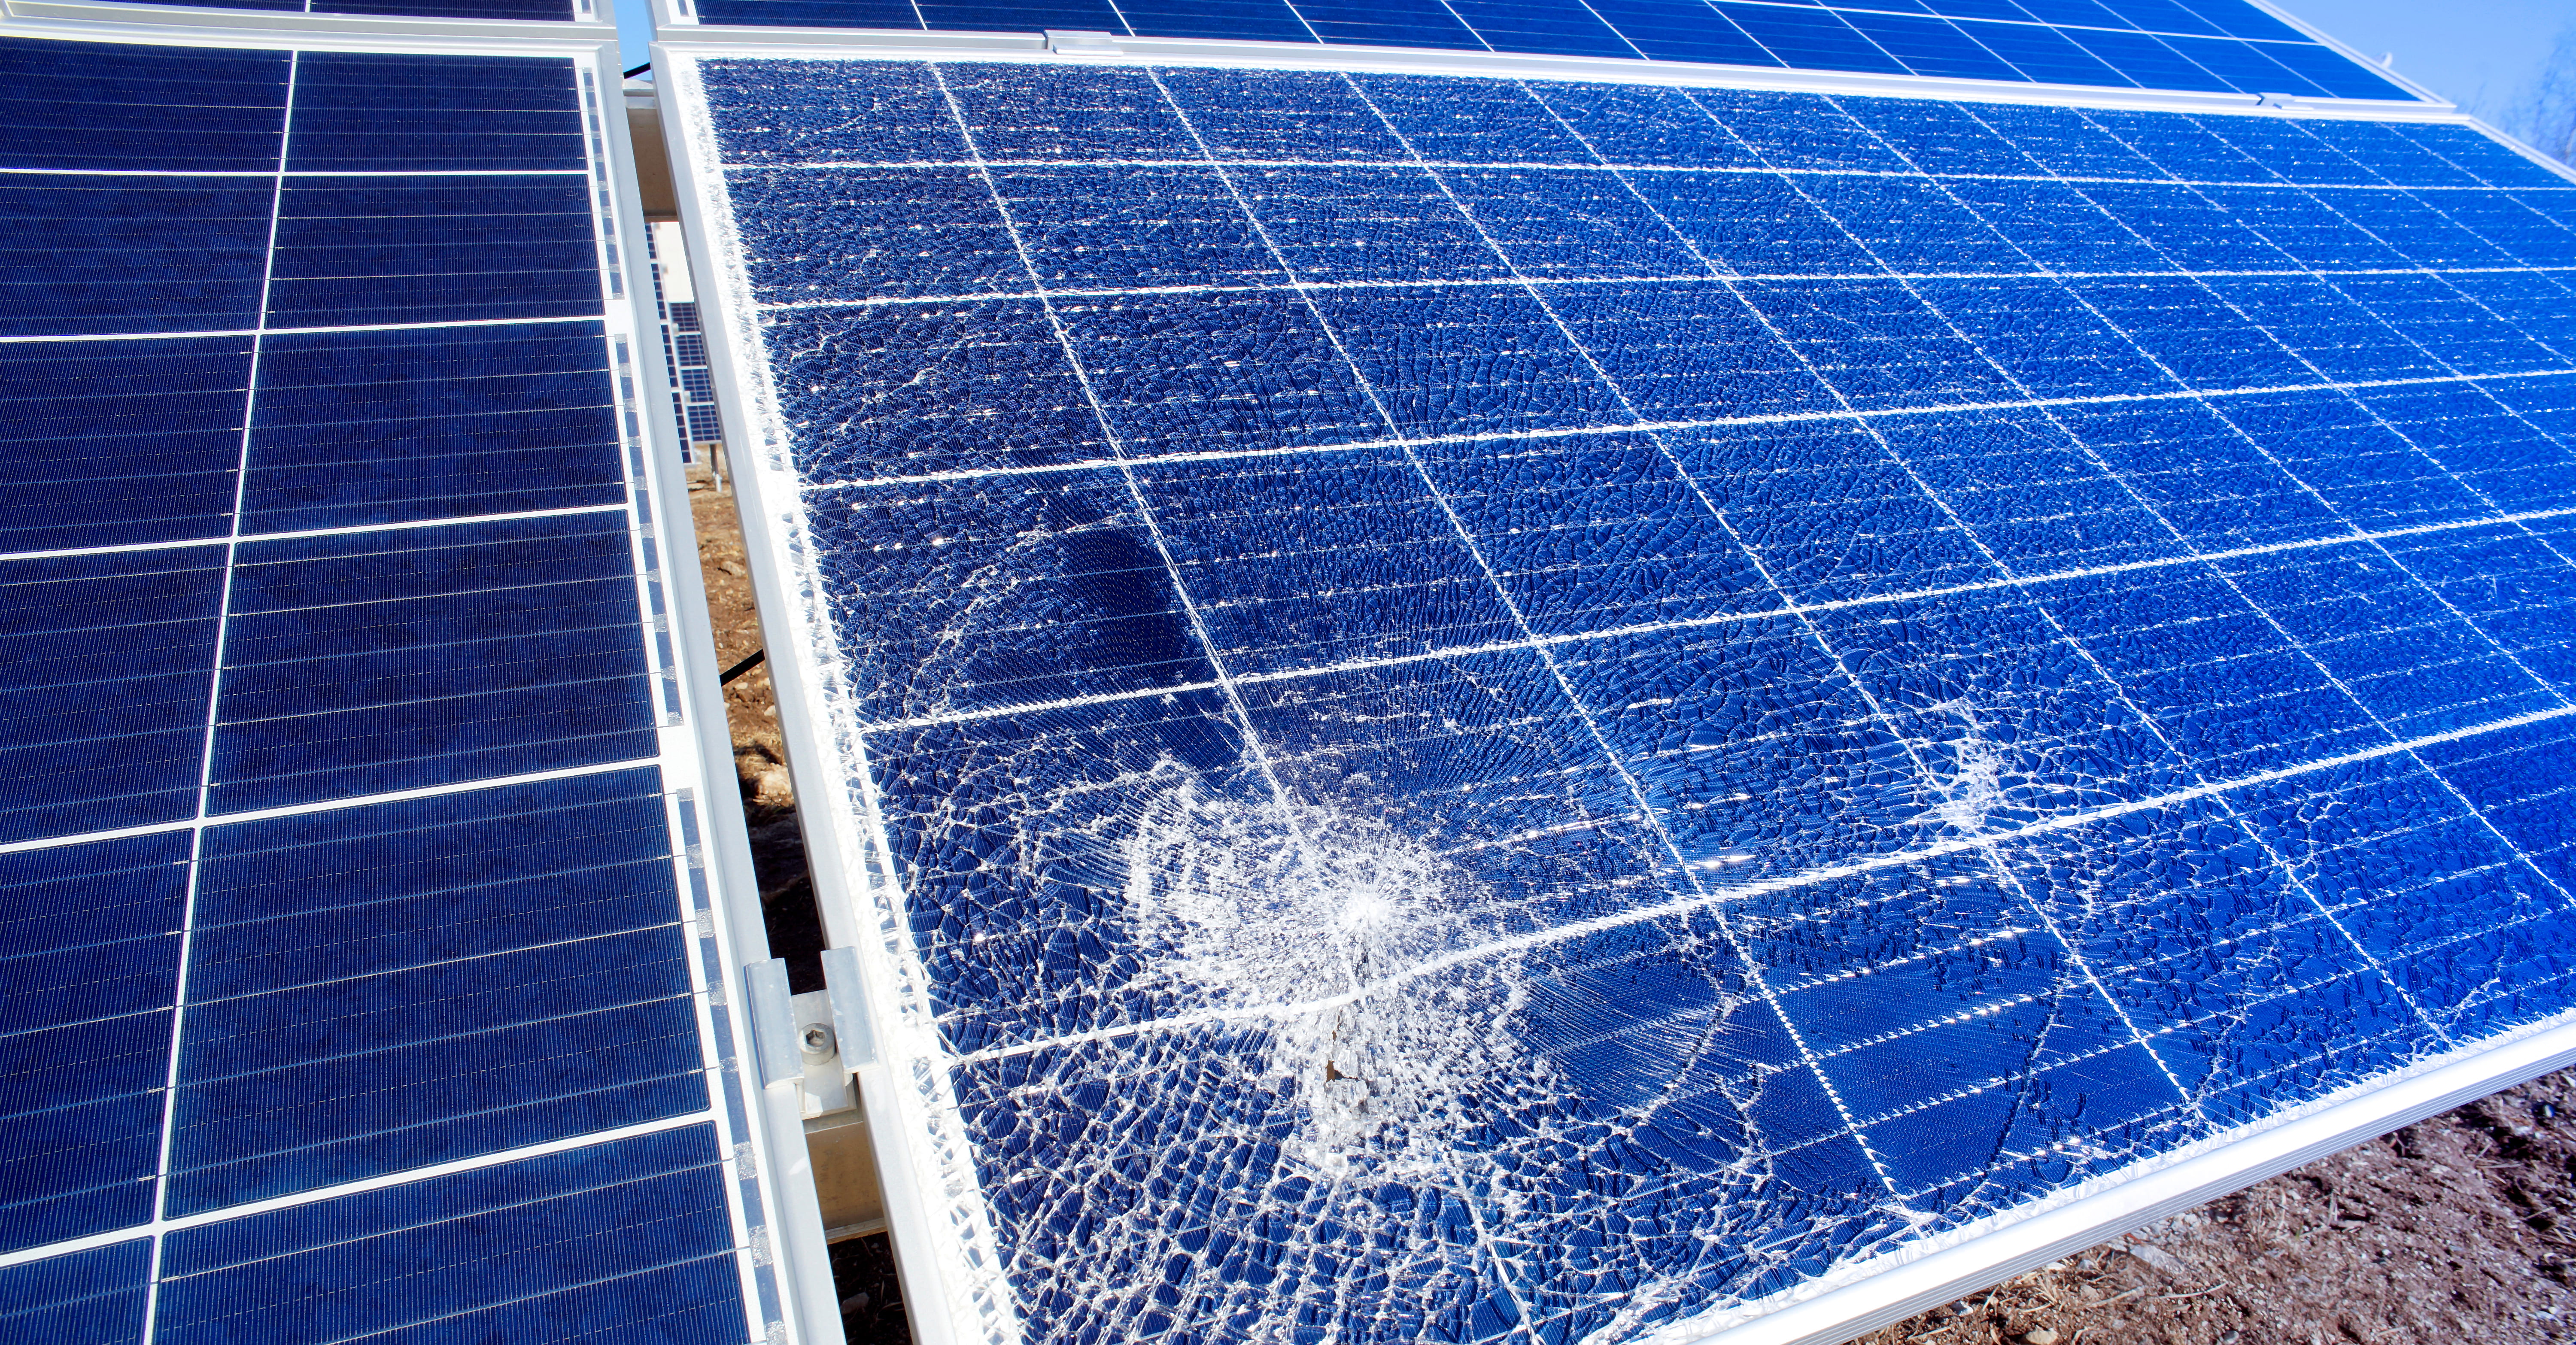 A broken solar panel. The pieces in a broken solar panel typically remain together in a sheet. Credit: nostal6ie, Shutterstock